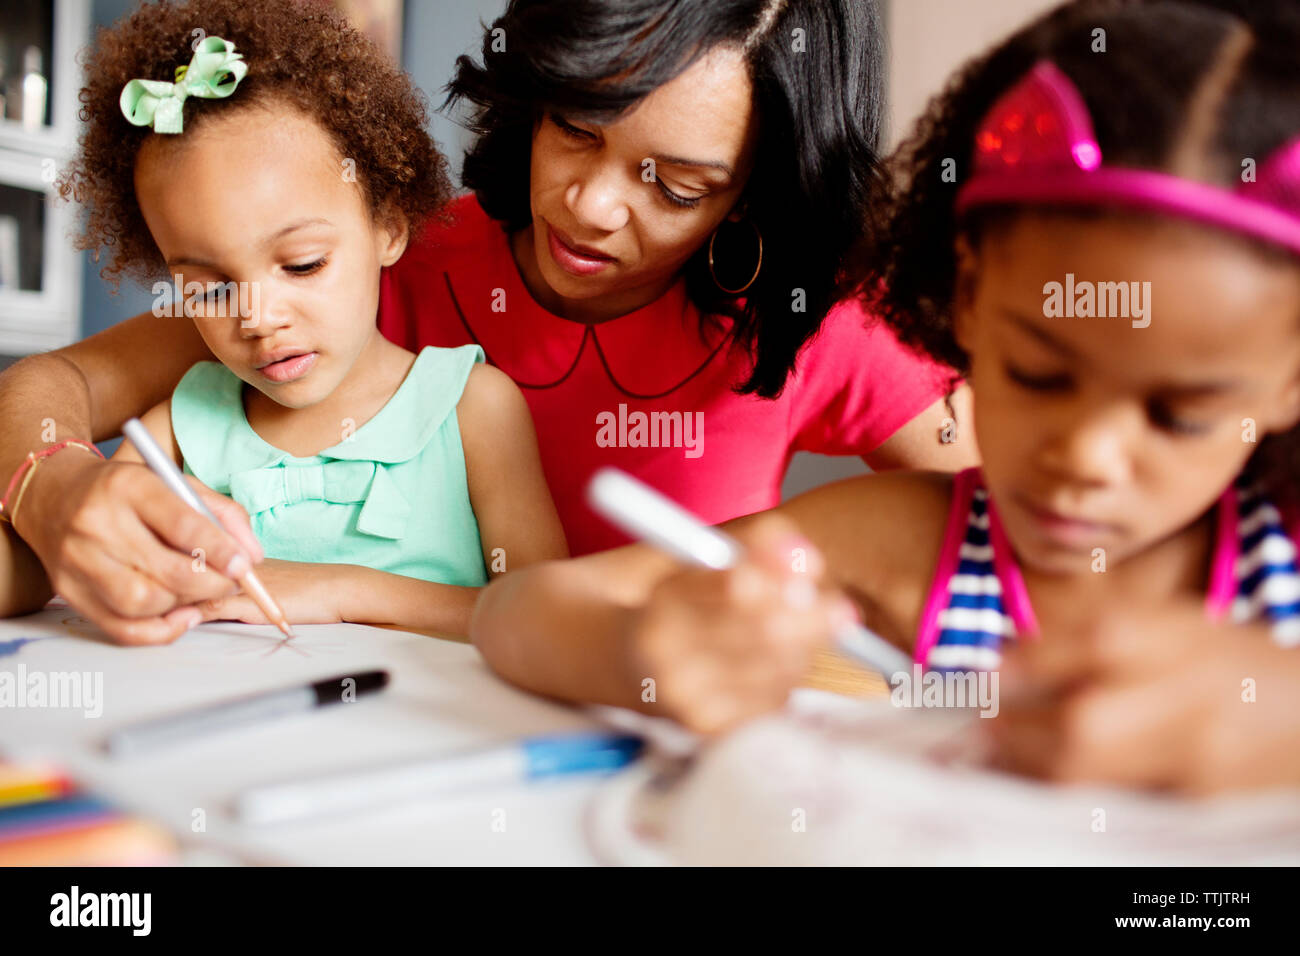 Mother assisting daughters in drawing at table Stock Photo